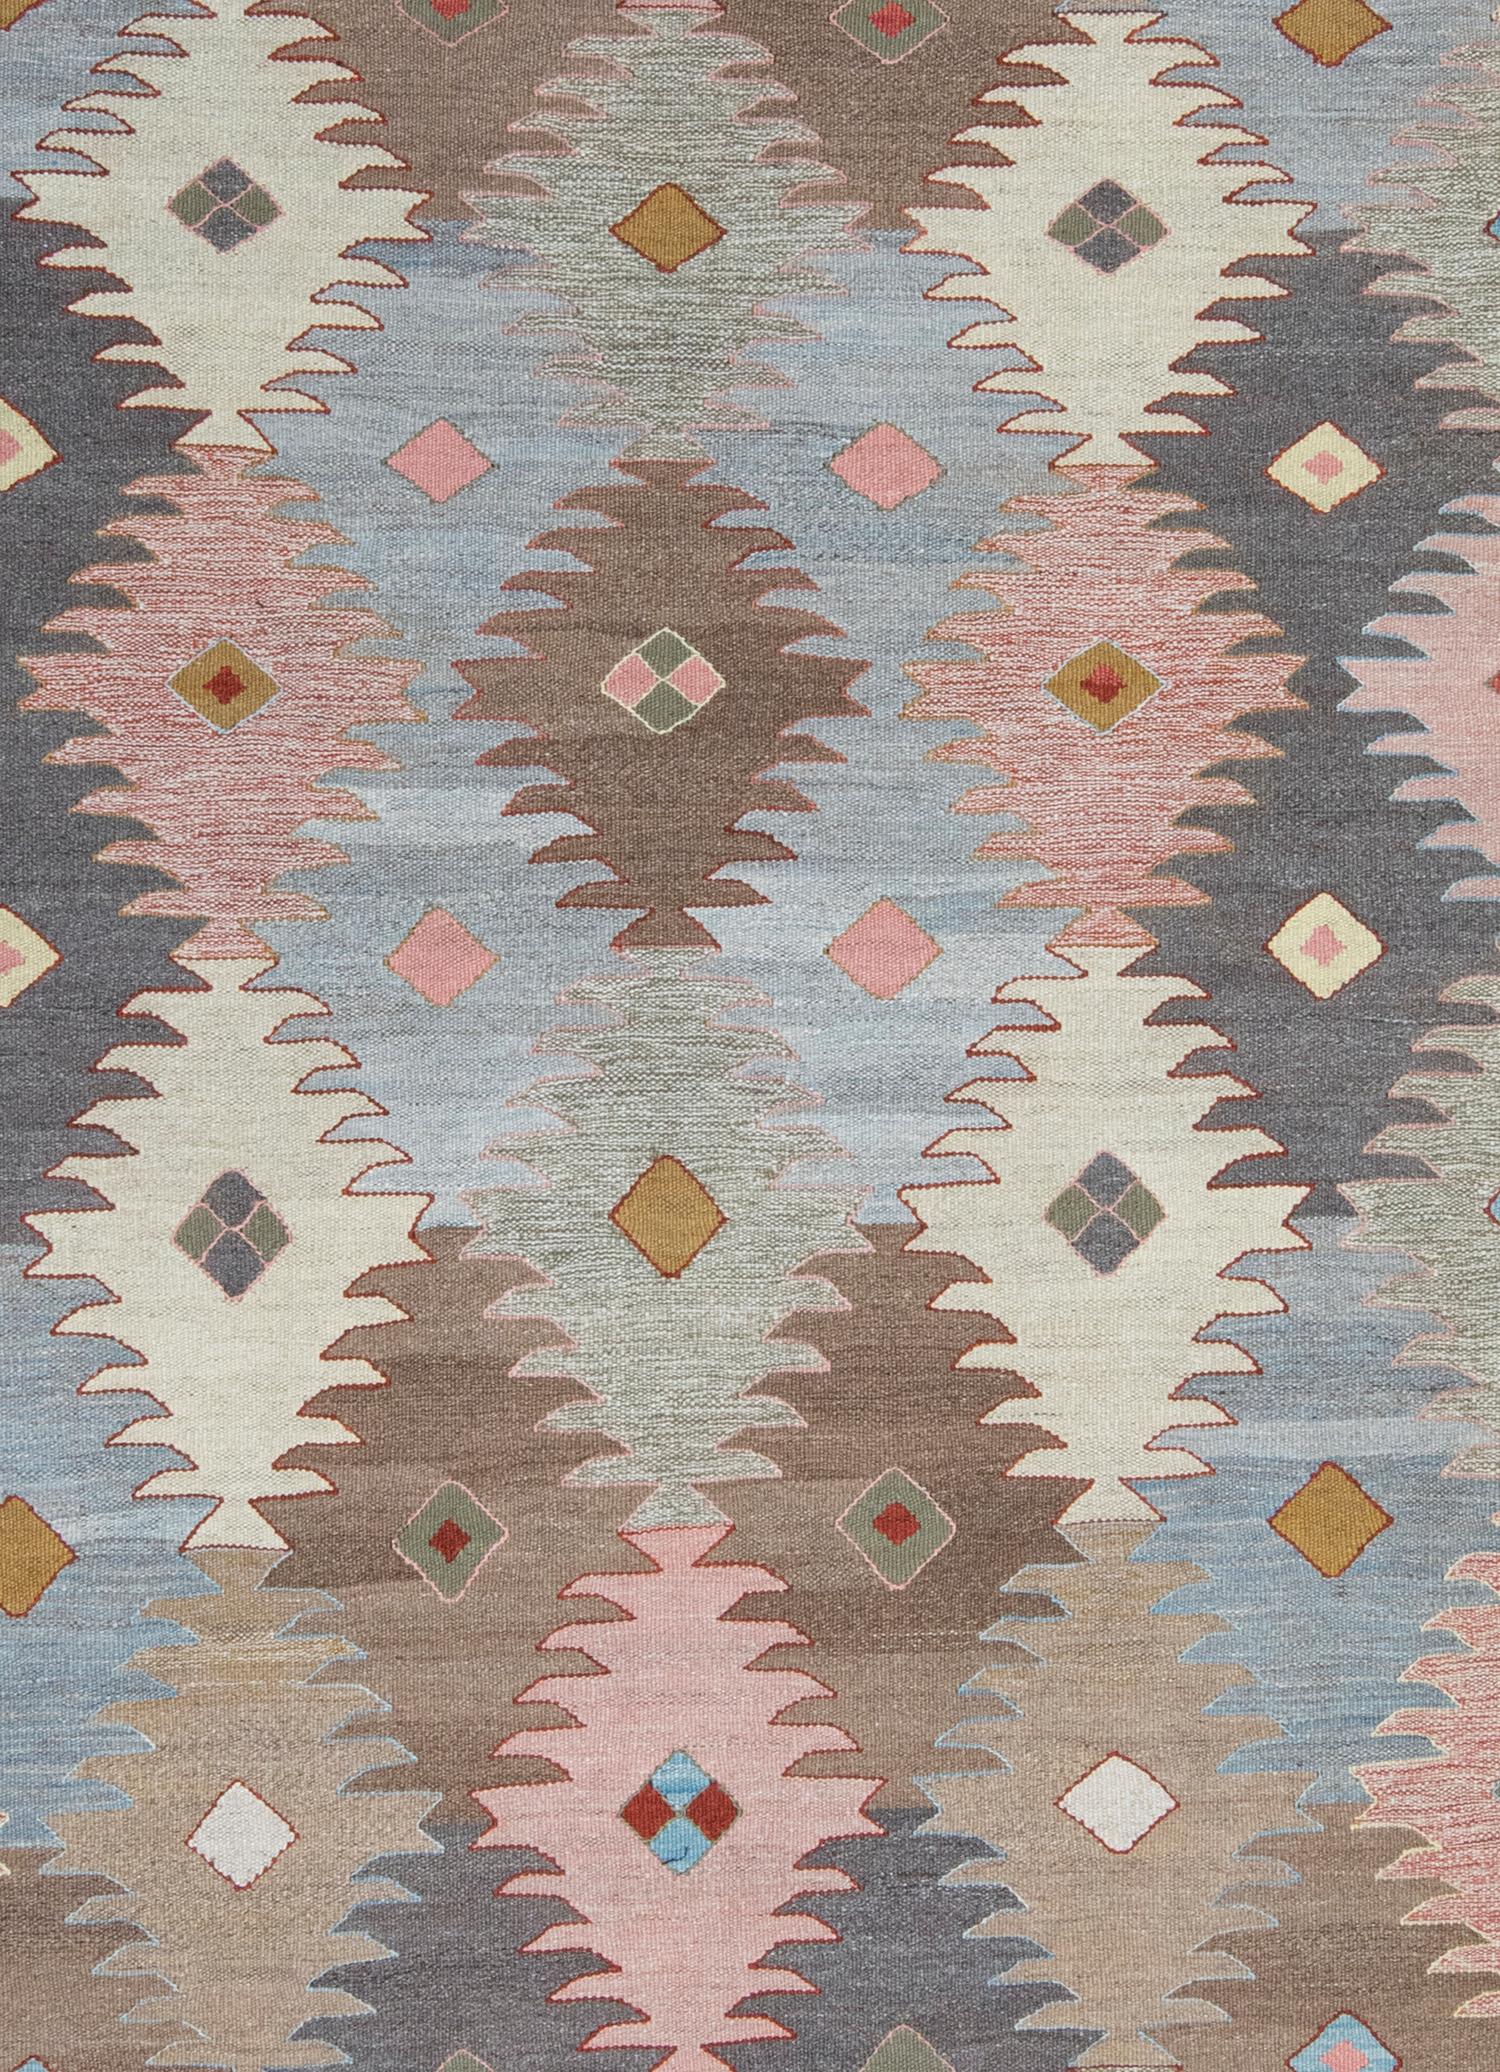 Our Kalach flatweave rugs resemble the rare and collectible antique Khalaj kilims by a Turkic group based south of Isfahan that were produced in the 19th century and earlier. Due to their limited availability, NASIRI revived the ancient dyeing and